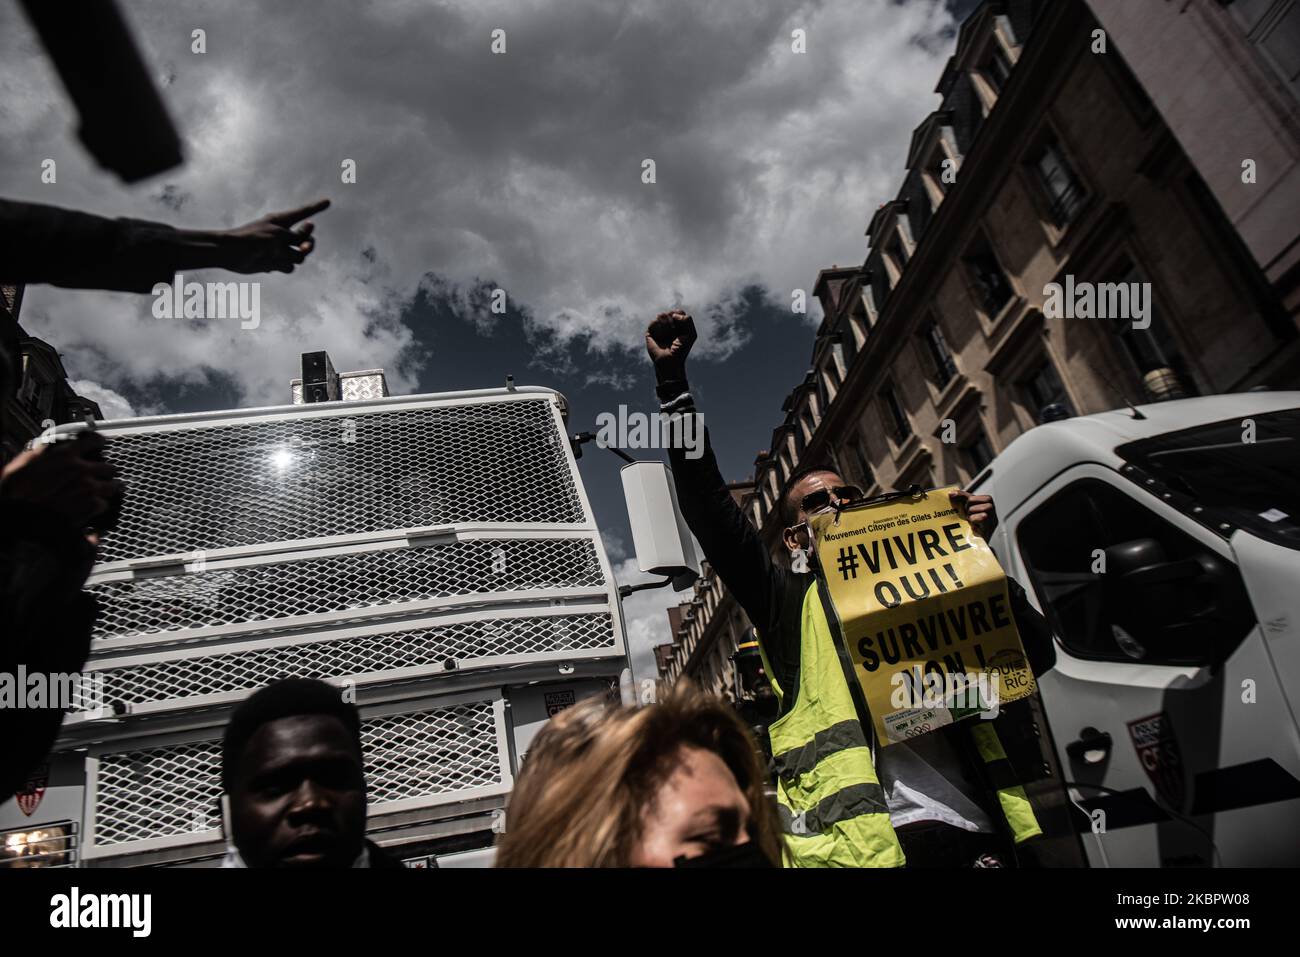 Protesters gather in front of the US Embassy in place de la Concorde, Paris, France, on June 6, 2020 to demonstrate against the murder of Adama Traore, George Floyd and victims of police racism and violence. (Photo by George Nickels/NurPhoto) Stock Photo